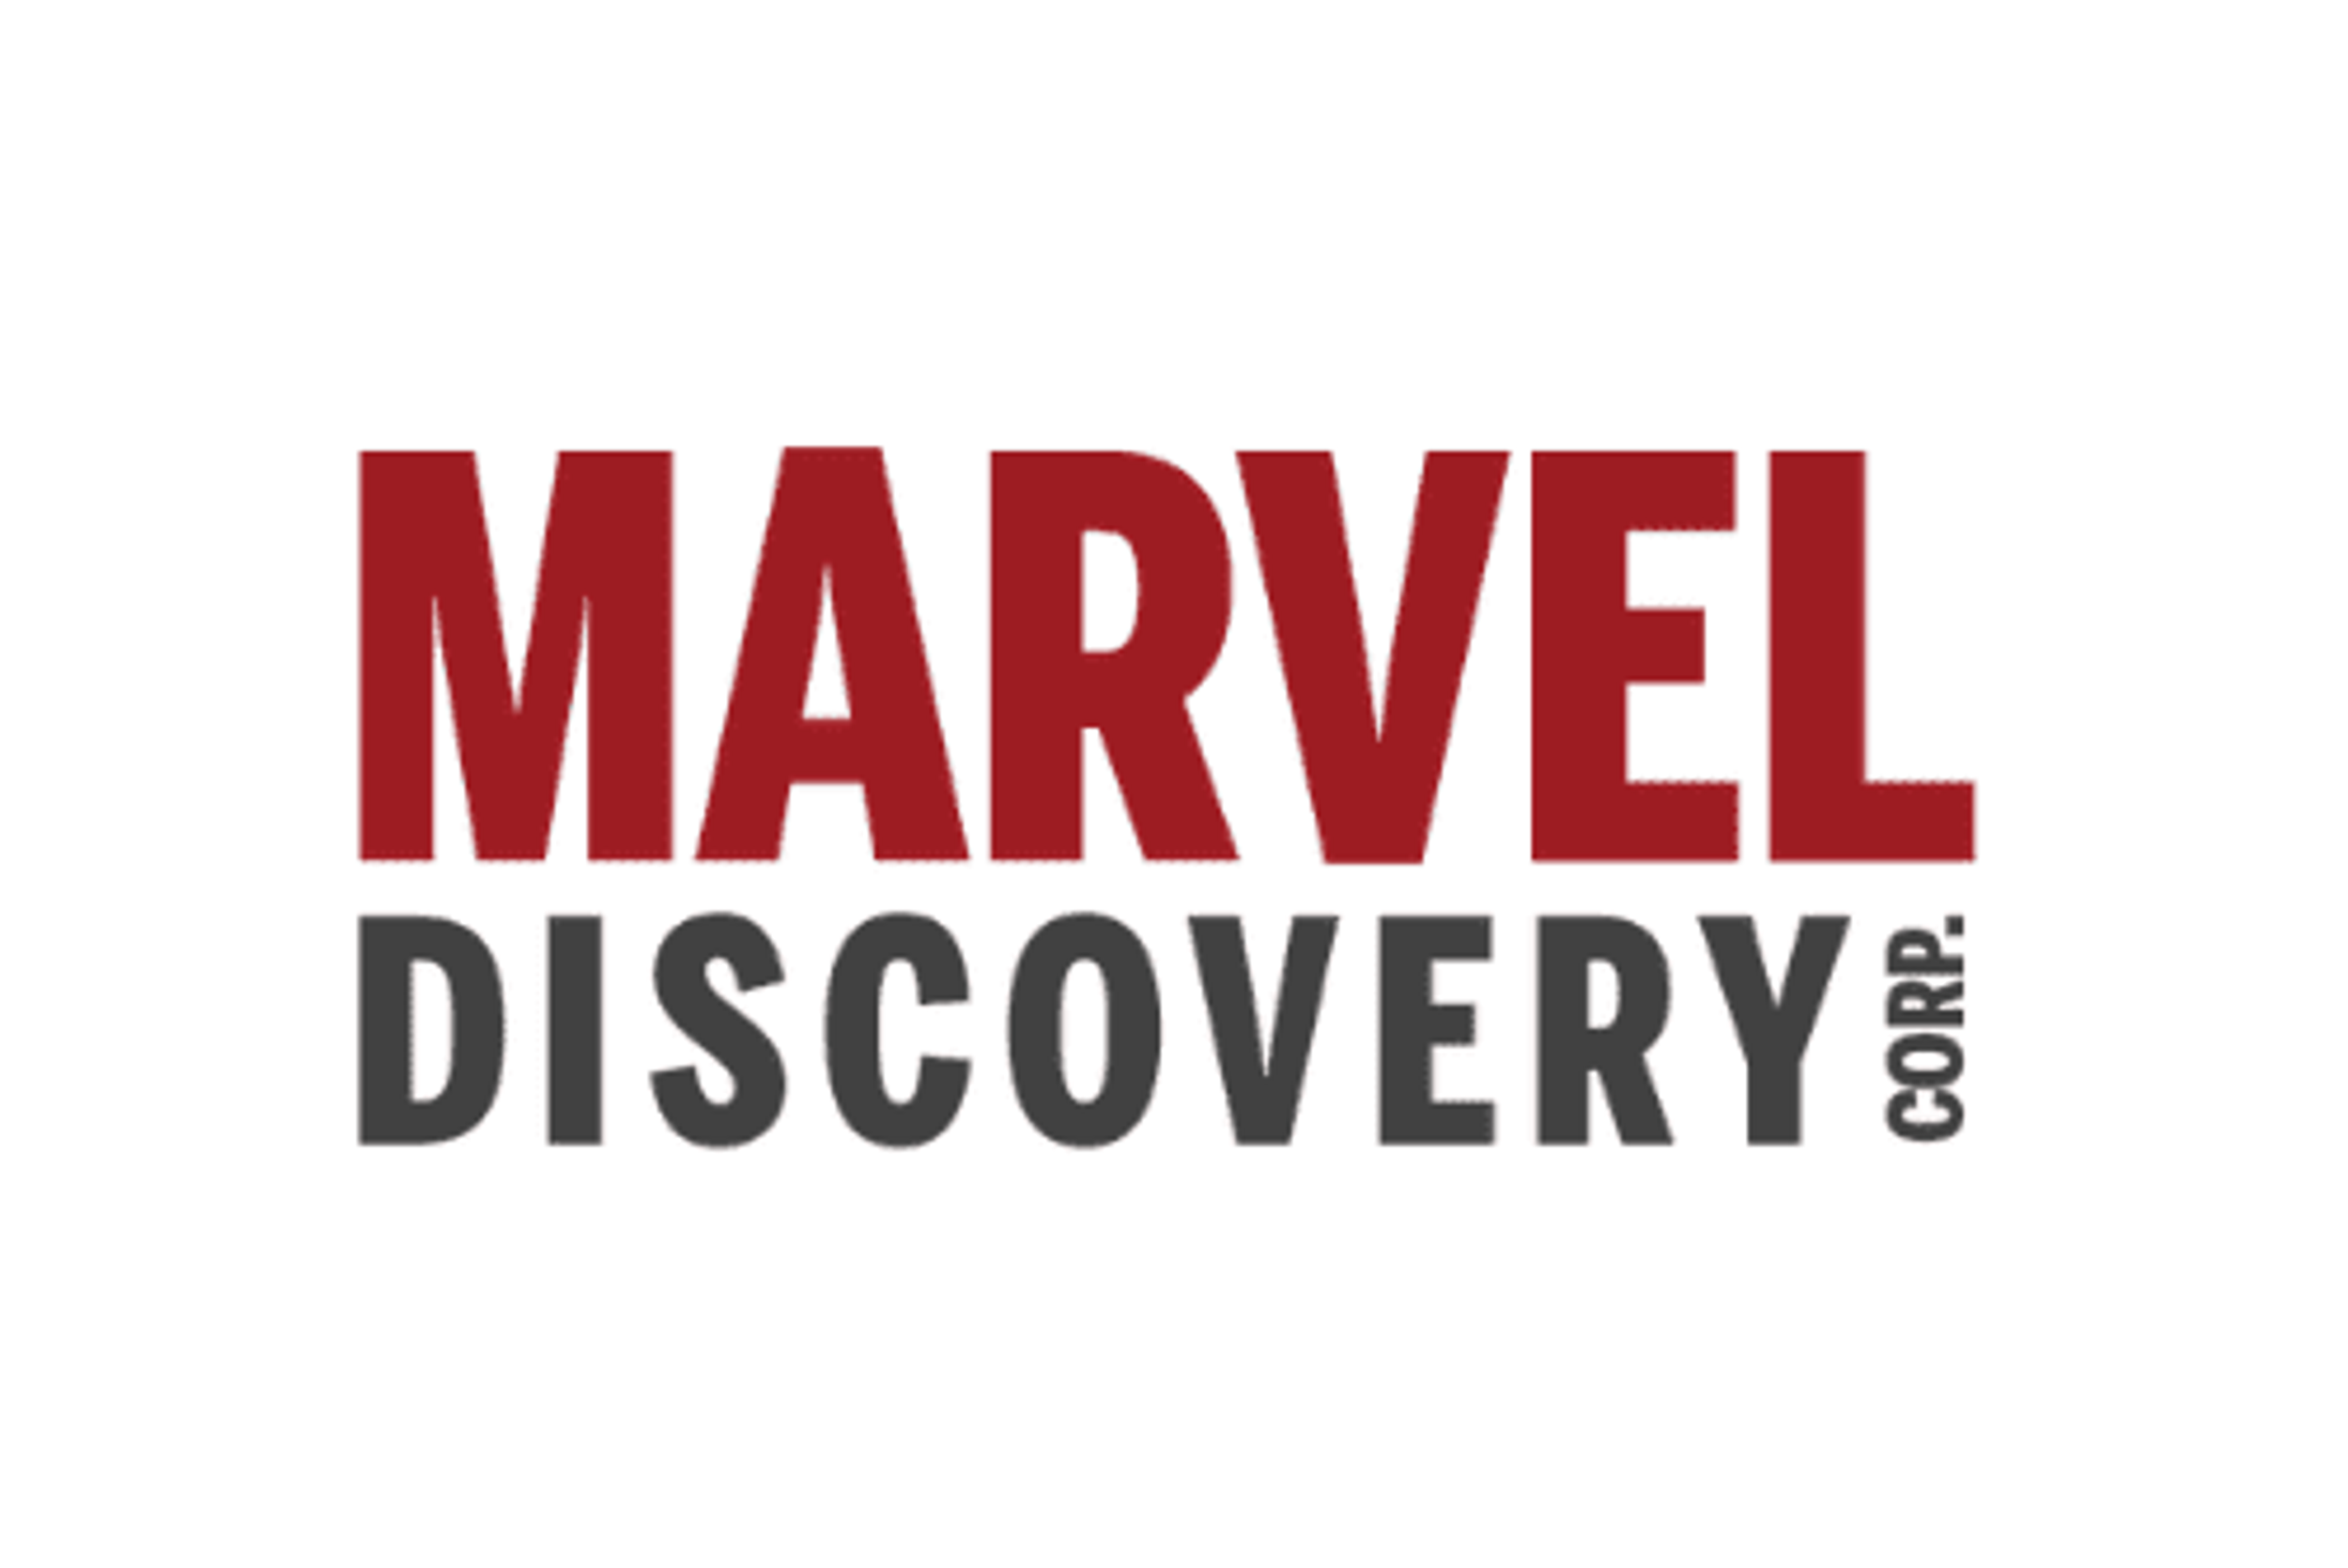 Marvel Forms Subsidiaries - Adding New Marvel Gold Corp. and New Marvel Energy Corp. to the Marvel Group of Companies